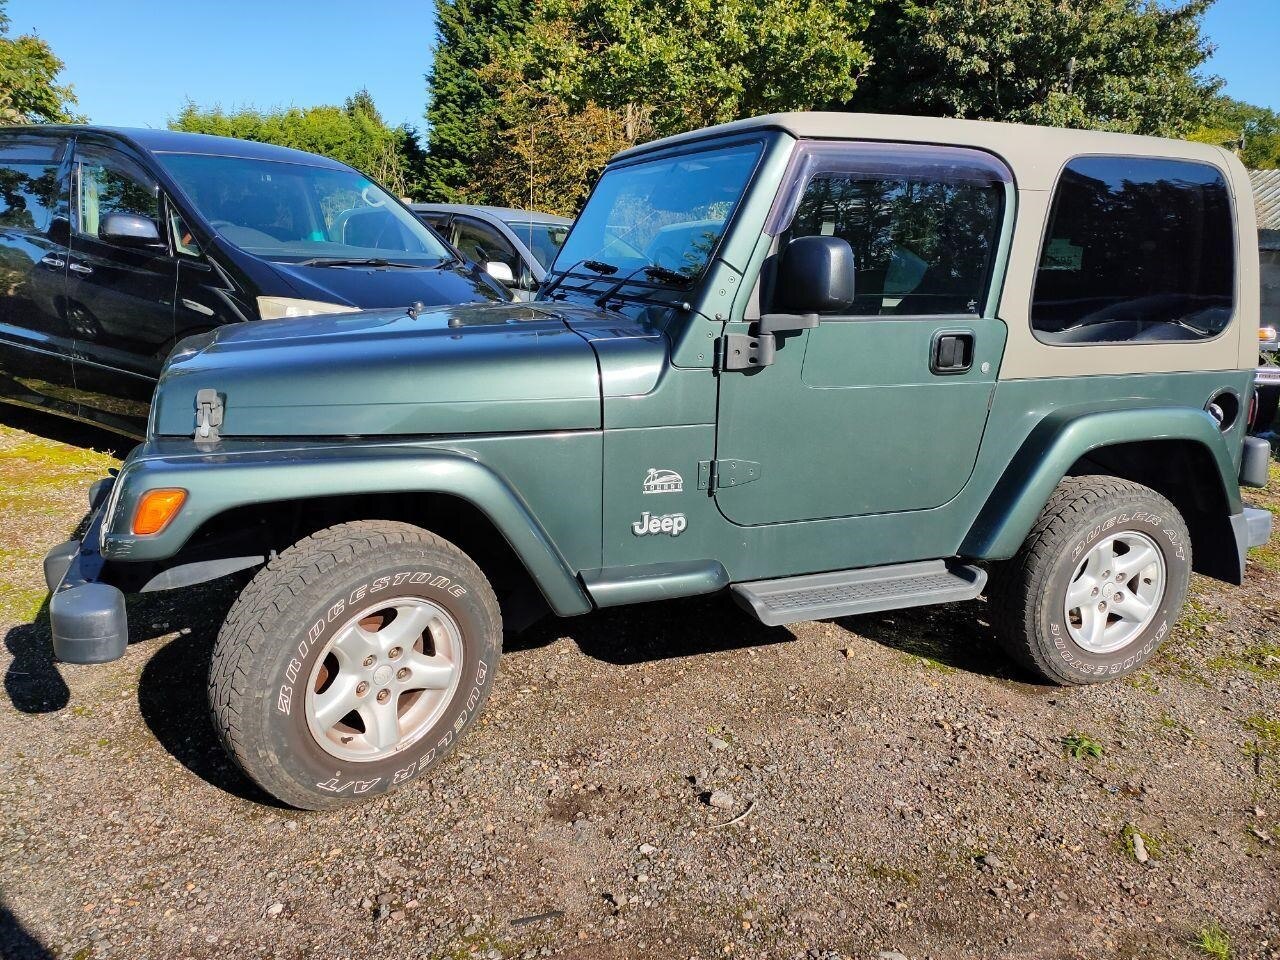 Used Green Jeep Wrangler for Sale - RAC Cars